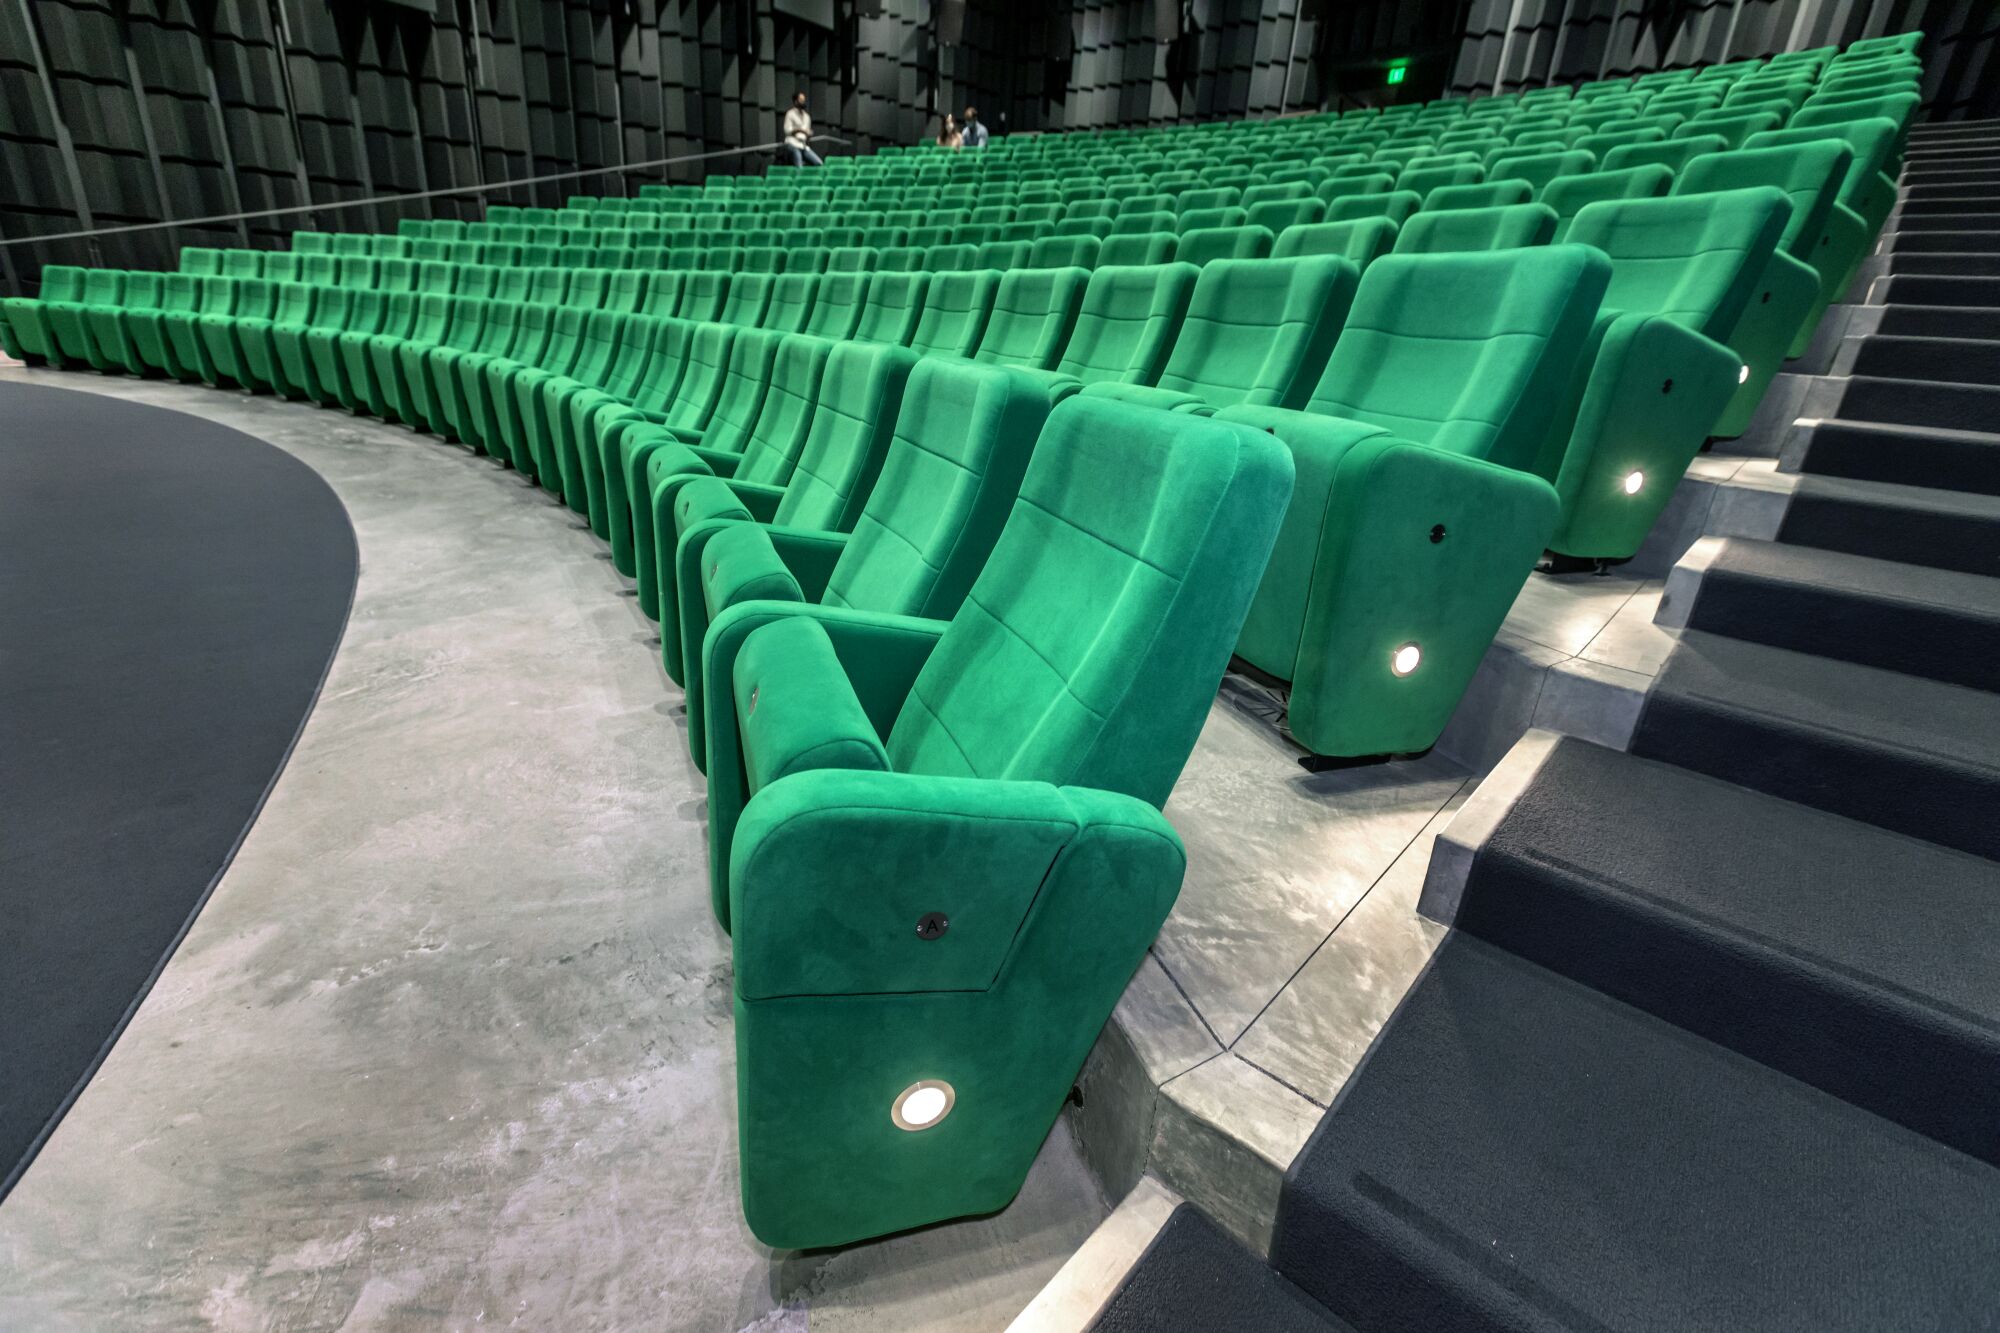 Green seats in Ted Mann Theater at the new Academy Museum of Motion Pictures.